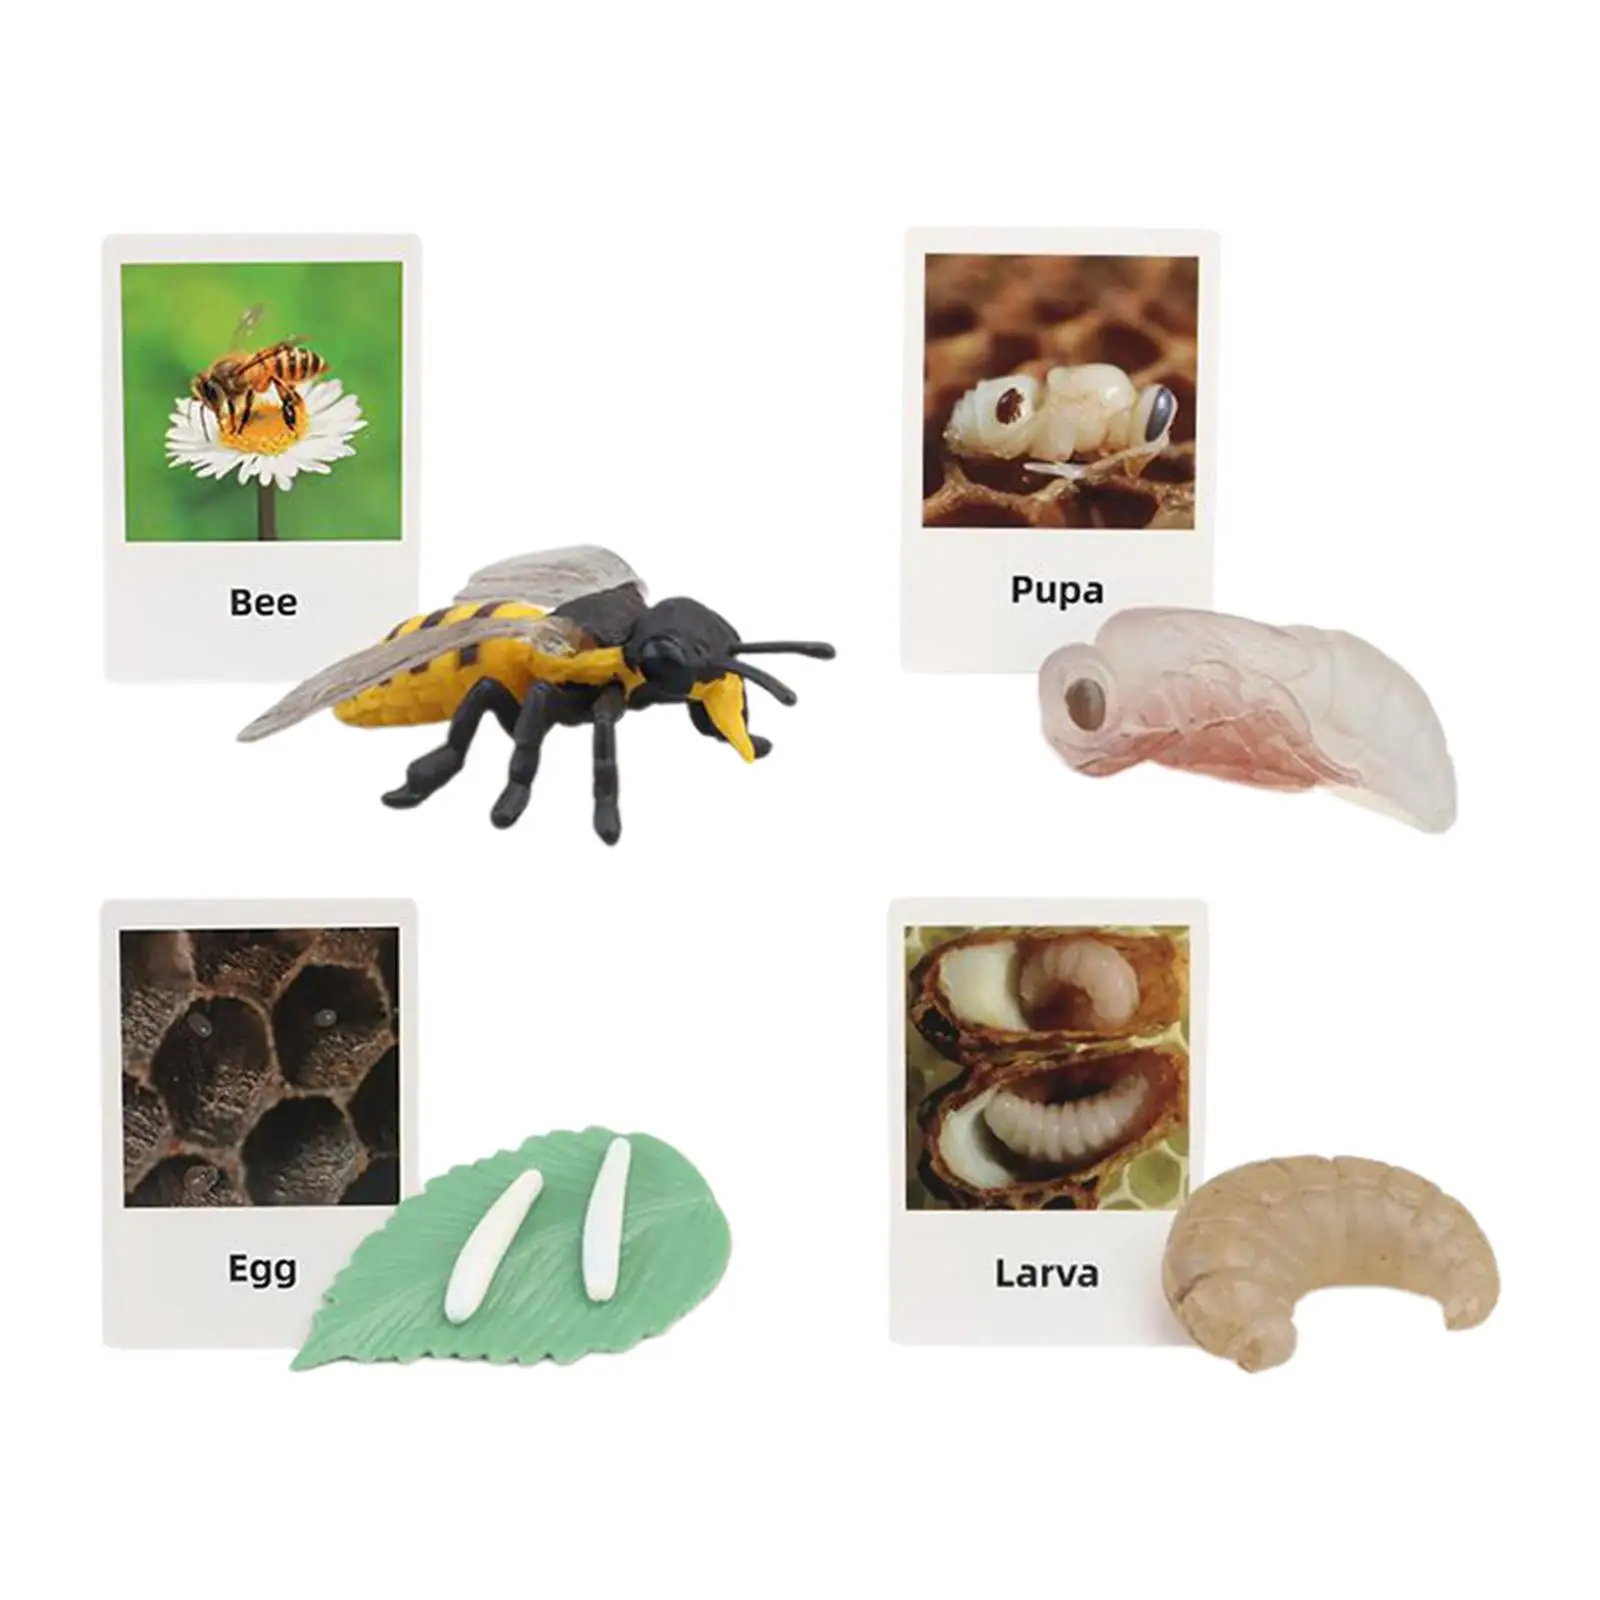 Realistic life Cycle Toy, Early Education, Animal Growth Cycle Figures for Preschool